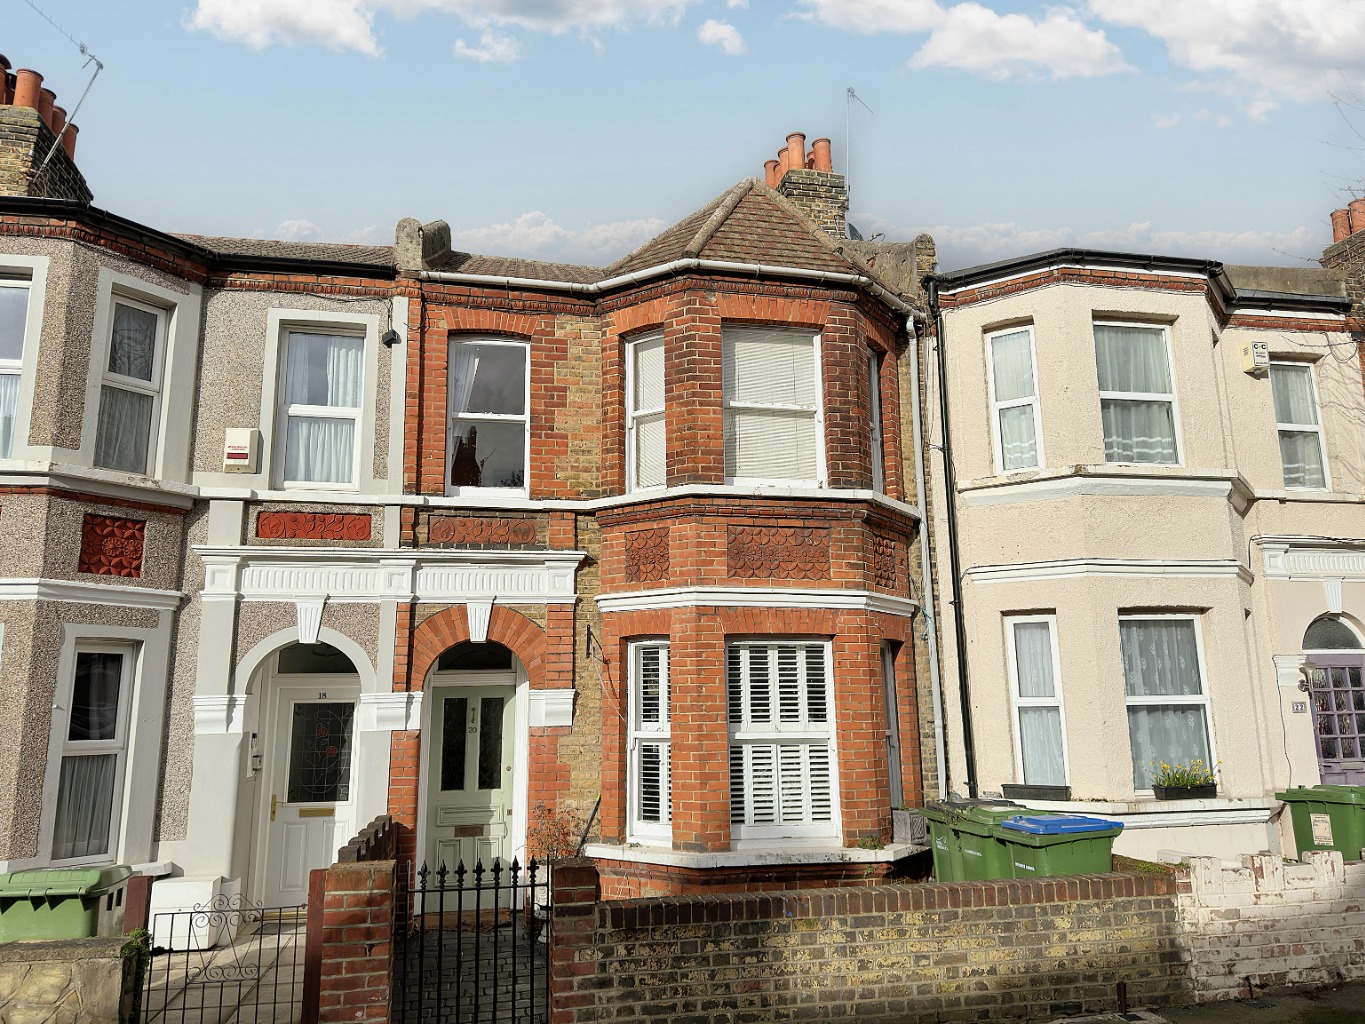 3 bed terraced house for sale in Plumstead - Property Image 1